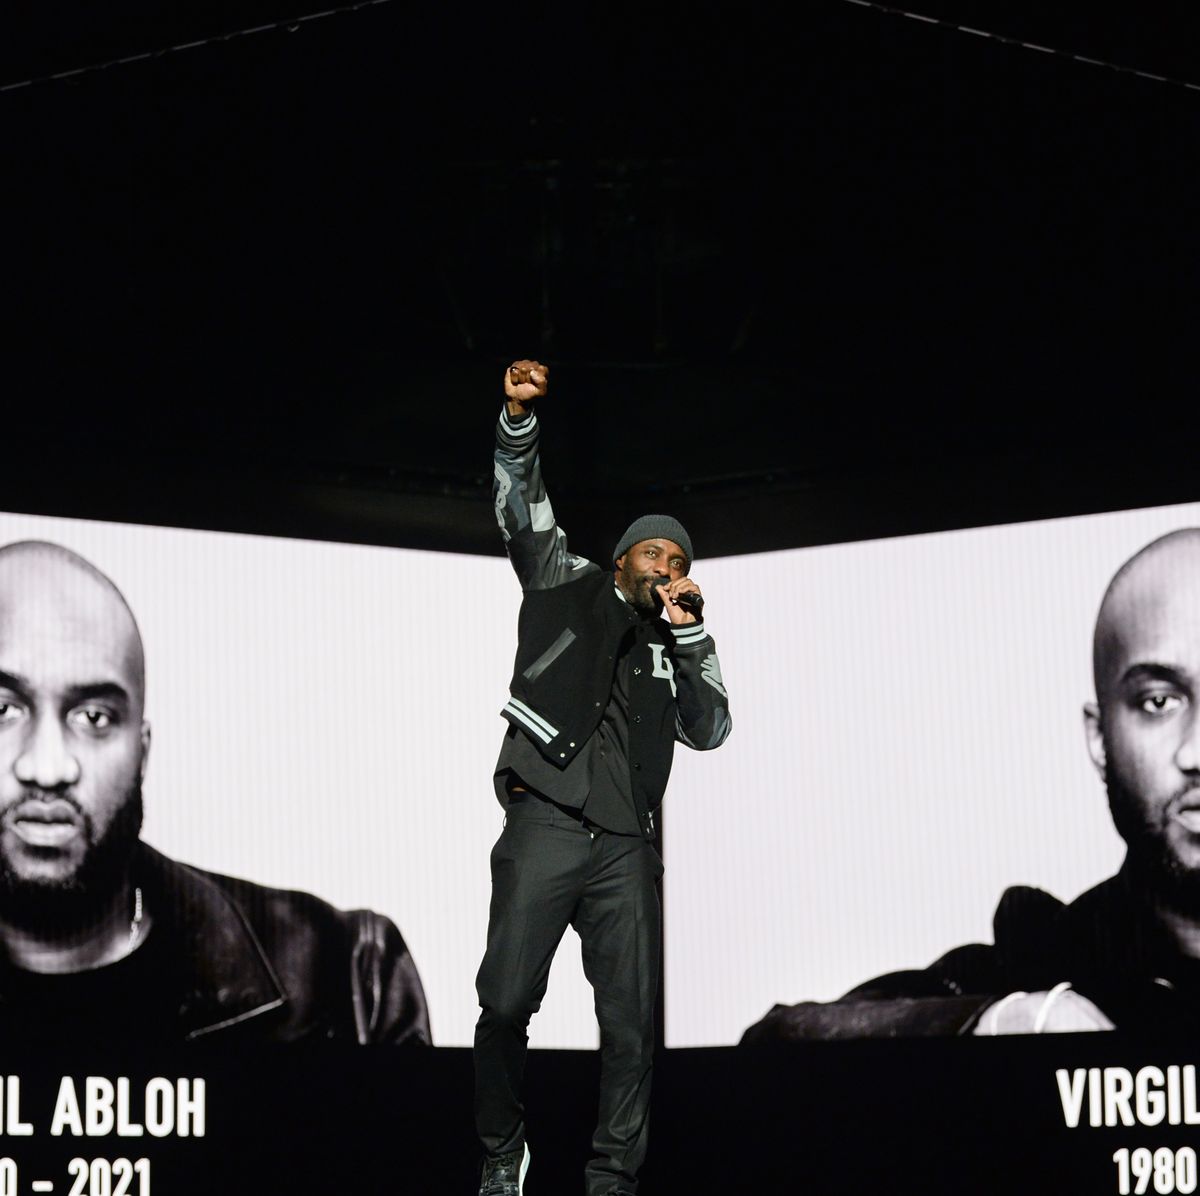 A tribute to Virgil Abloh - Vestiaire Collective